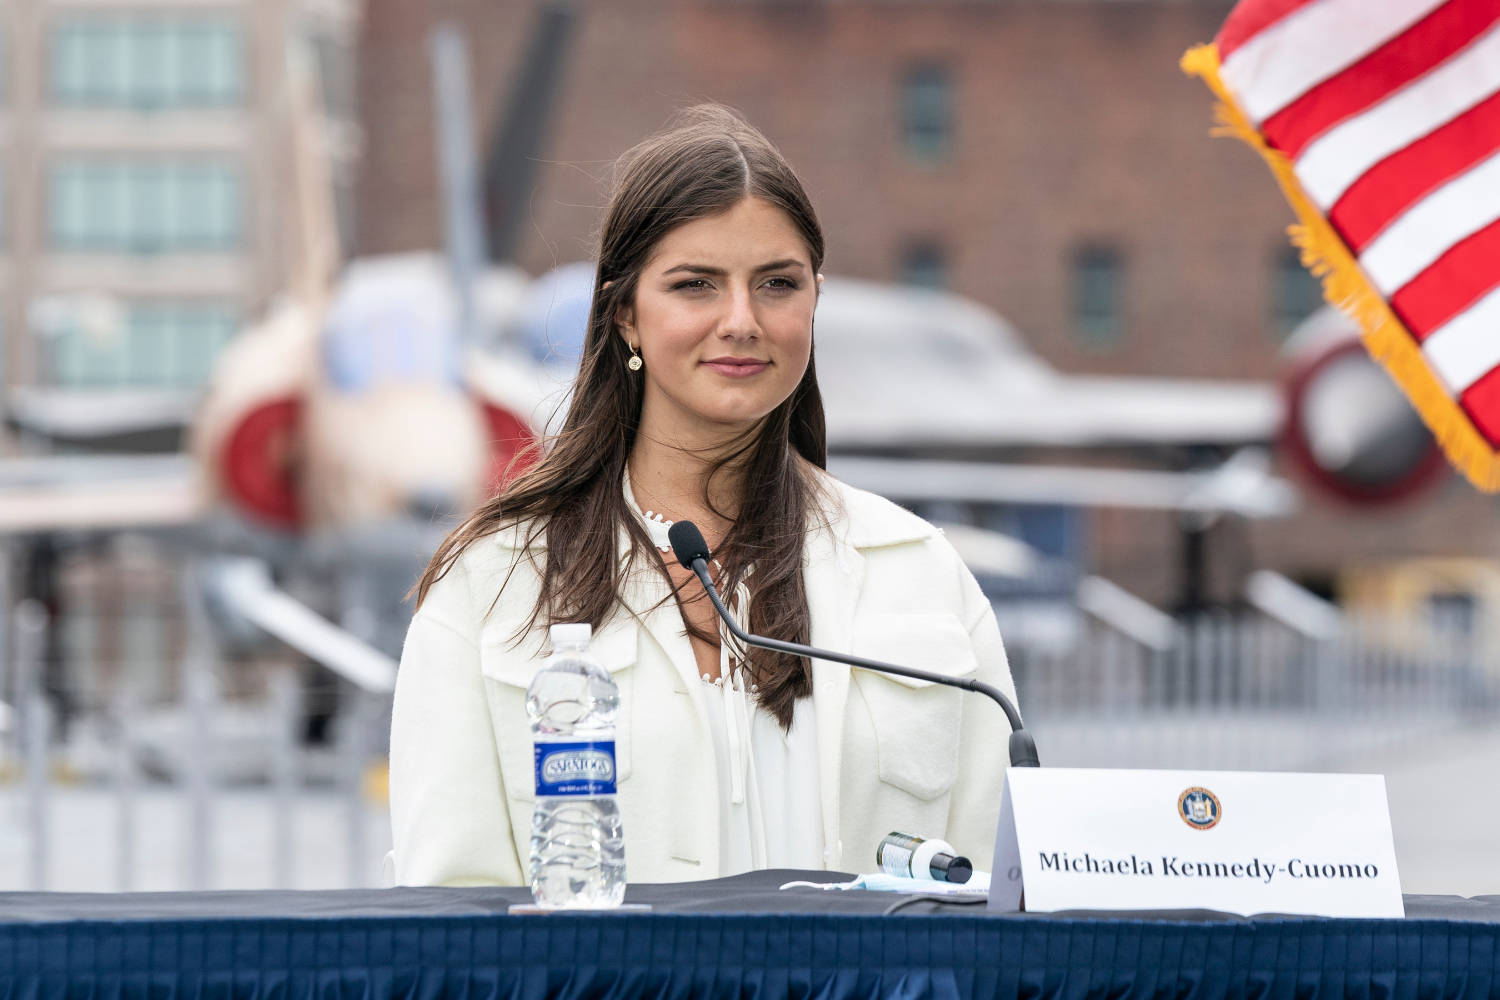 Michaela Kennedy-Cuomo attends Governor Cuomo Announcement and Briefing on COVID-19 Response on Intrepid Sea, Air and Space Museum on Memorial Day. She recently identified as a demisexual during an interview.